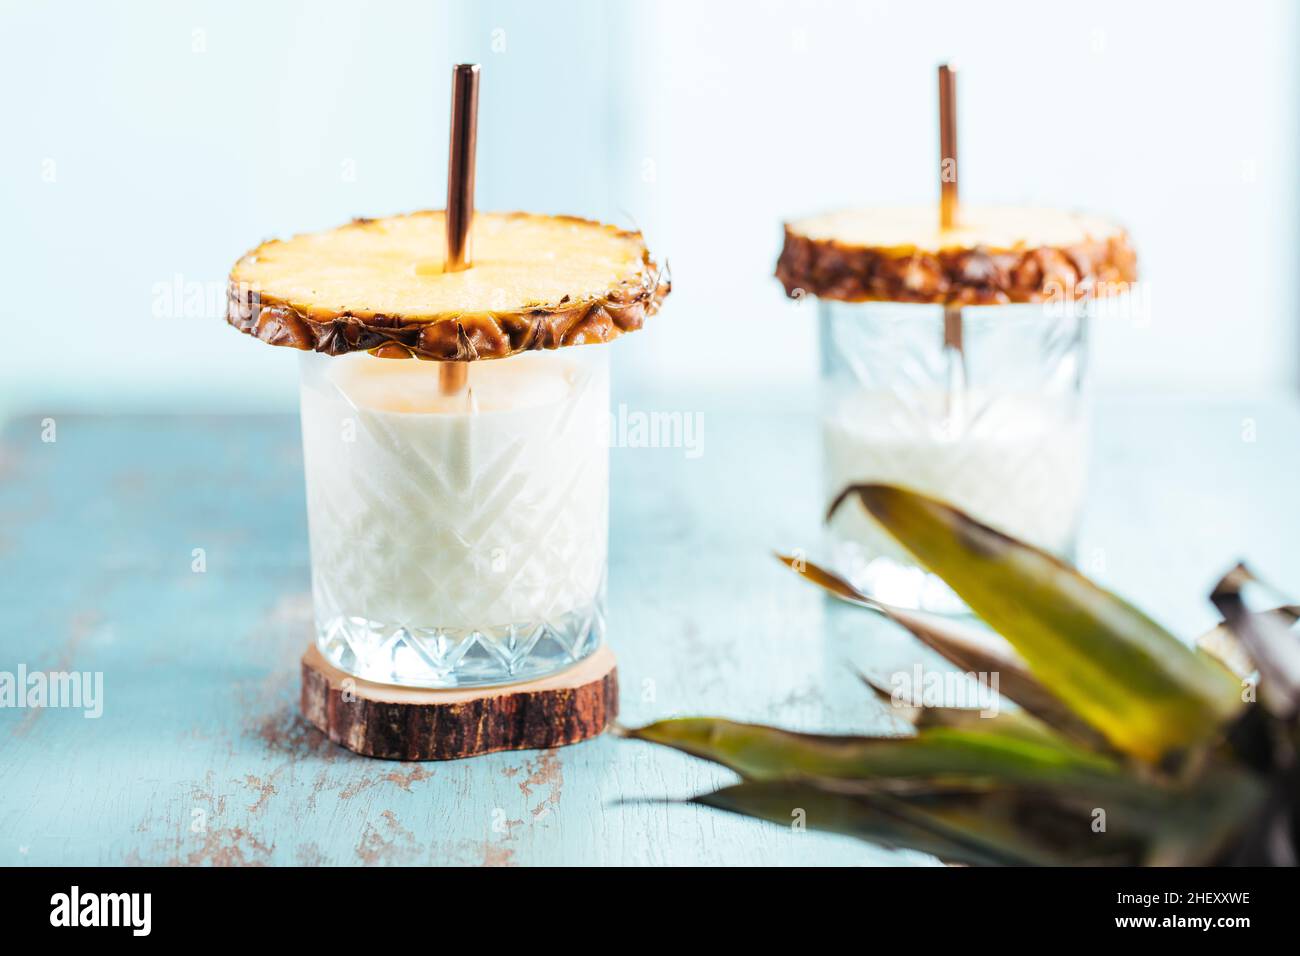 Pina colada cocktail creative decorated with pineapple Stock Photo